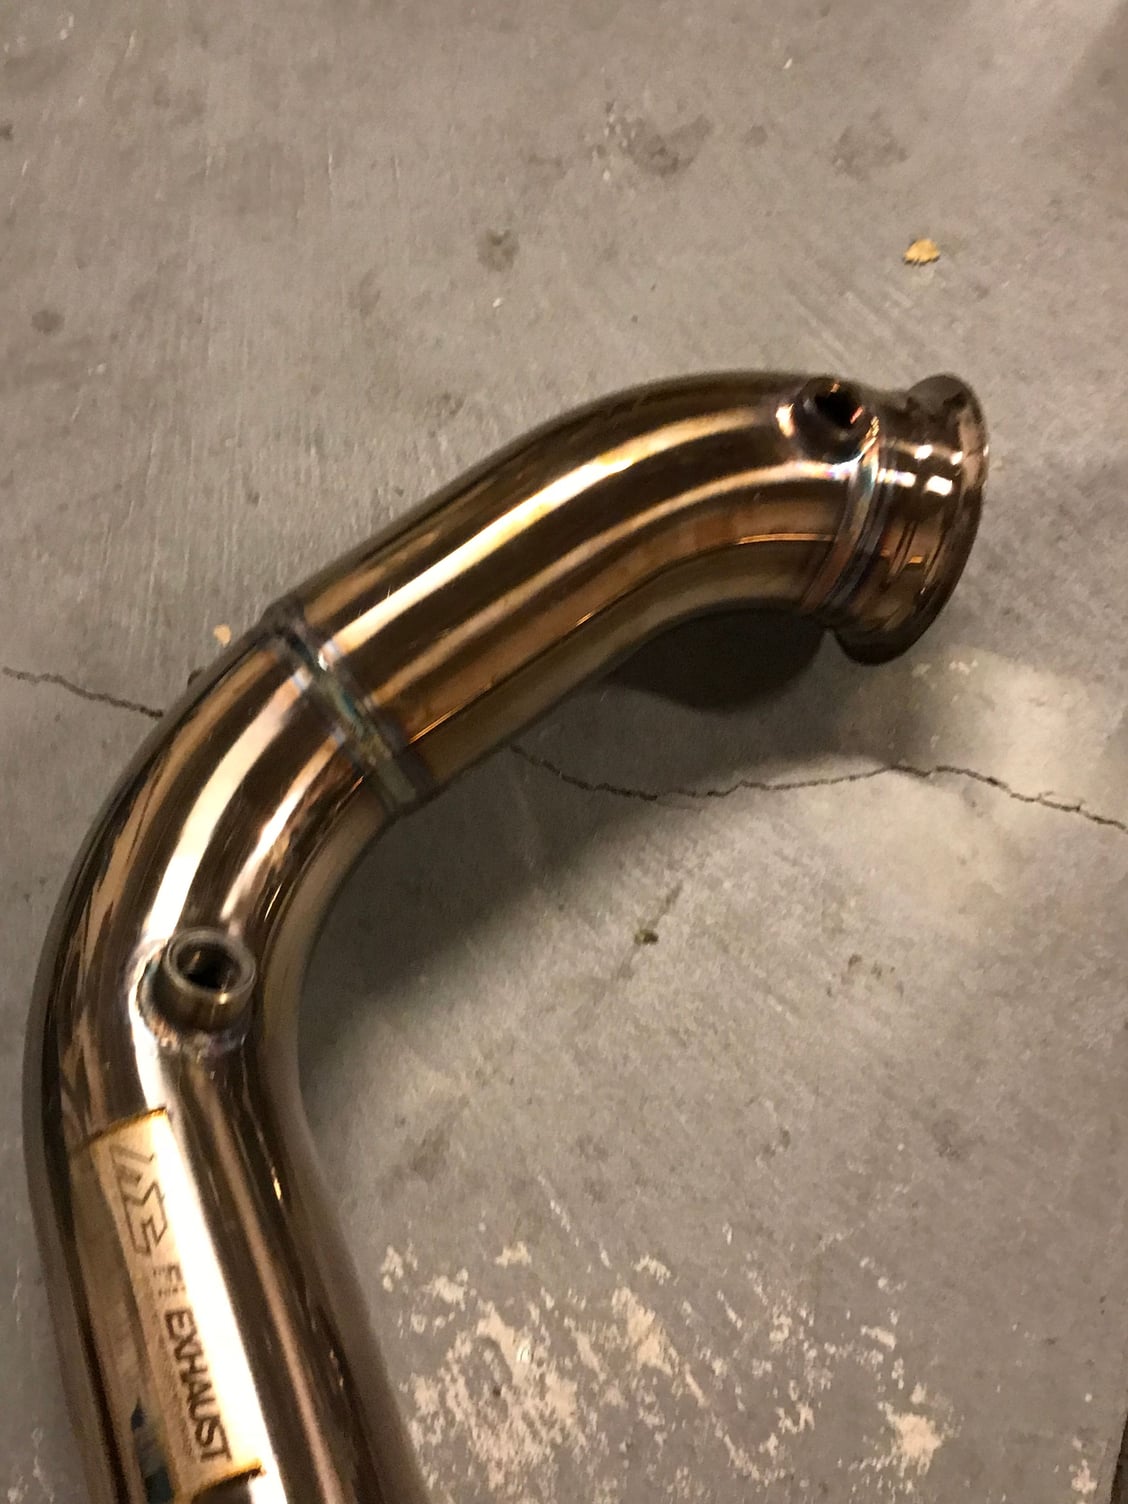 Engine - Exhaust - FI Downpipes W205 C63S - Used - 2017 Mercedes-Benz C63 AMG - San Jose, CA 95035, United States